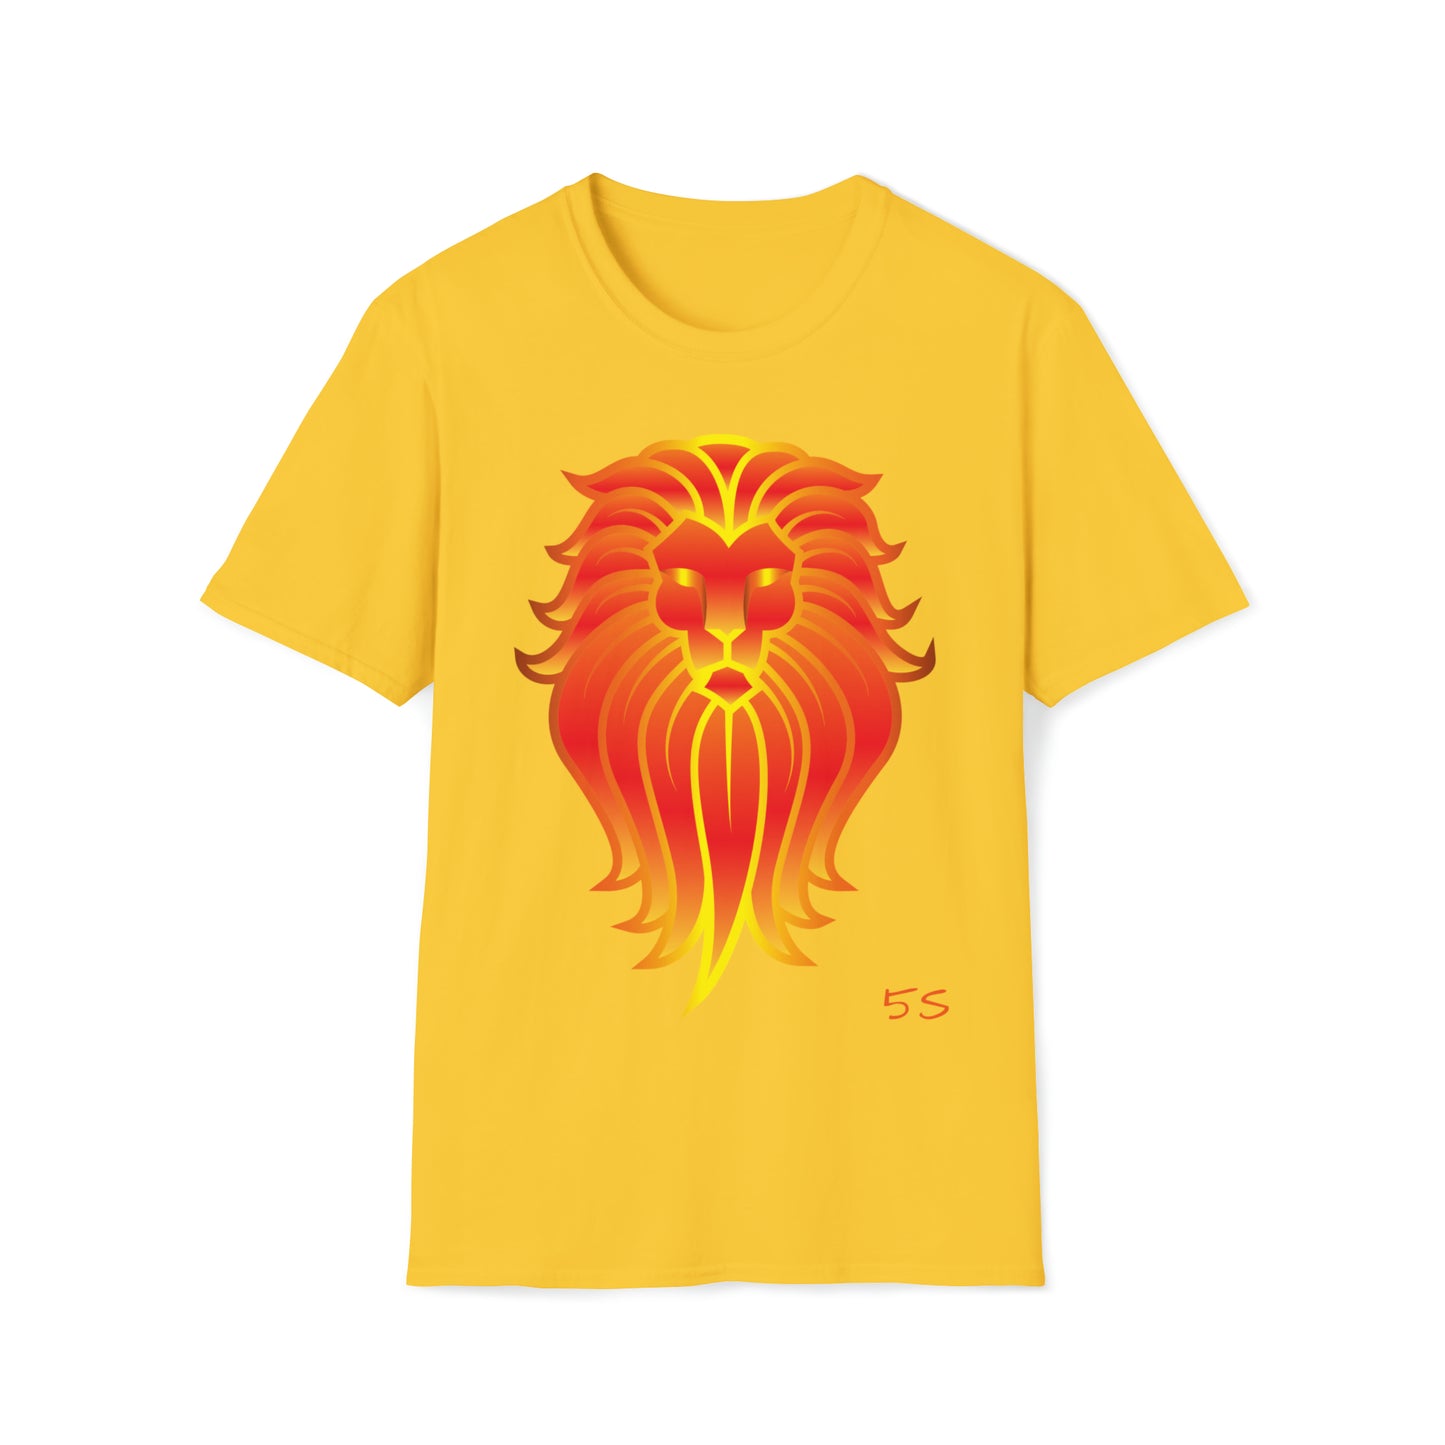 Lions Head Fire - Unisex Softstyle T-Shirt